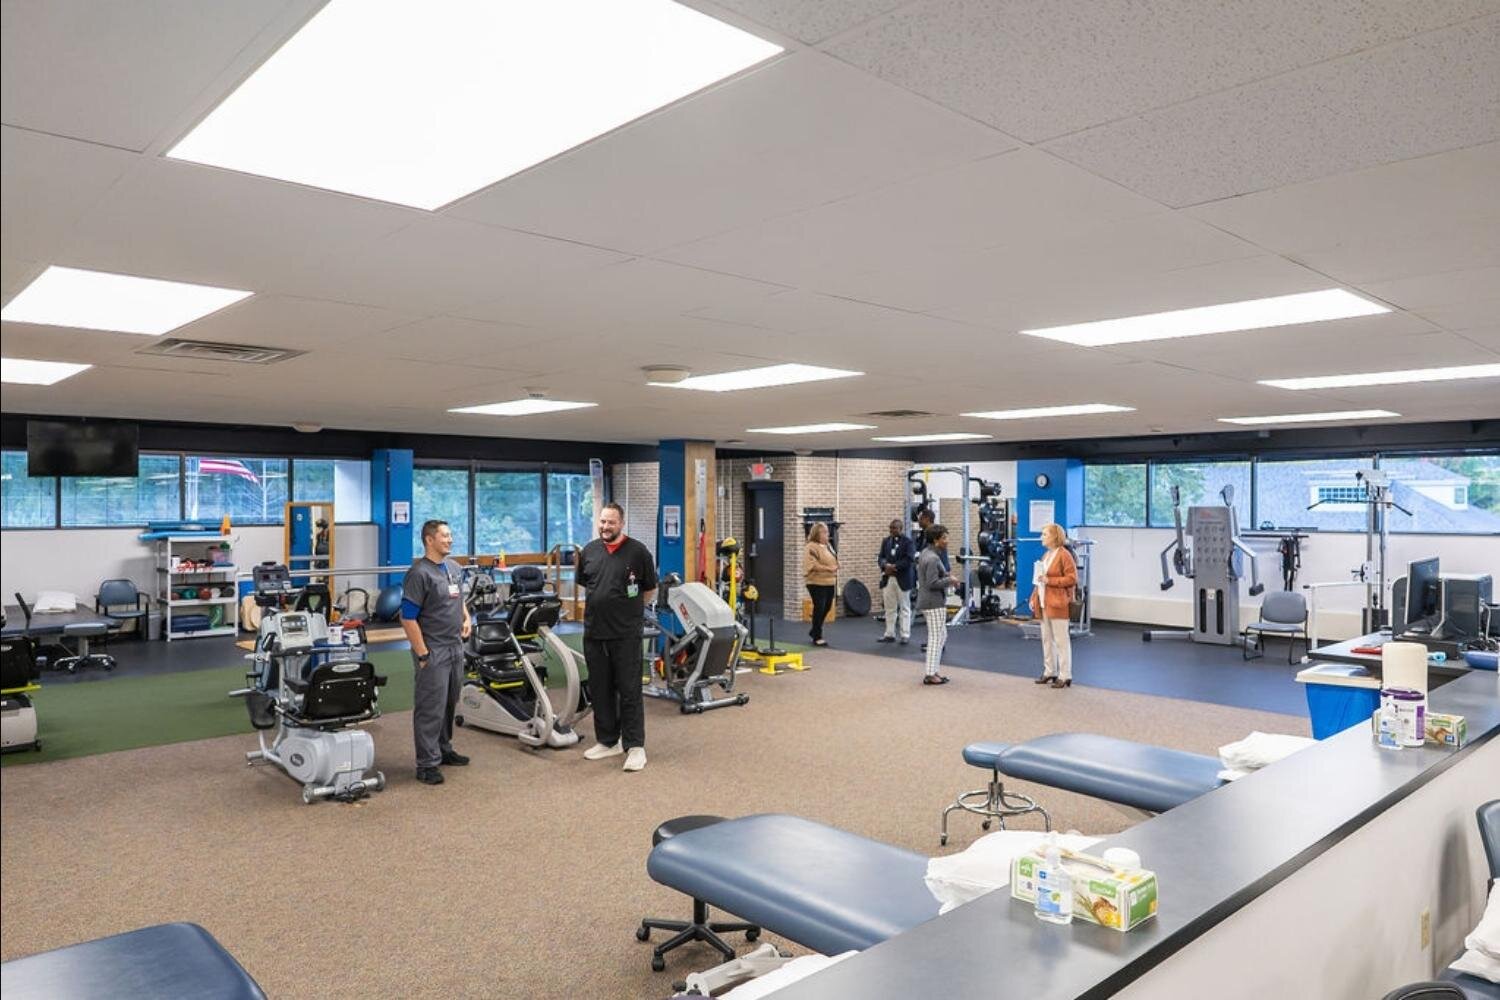 Physical Therapy and Sports Medicine are among the services offered in Mercy Health - Springfield's newly opened Musculoskeletal Institute.